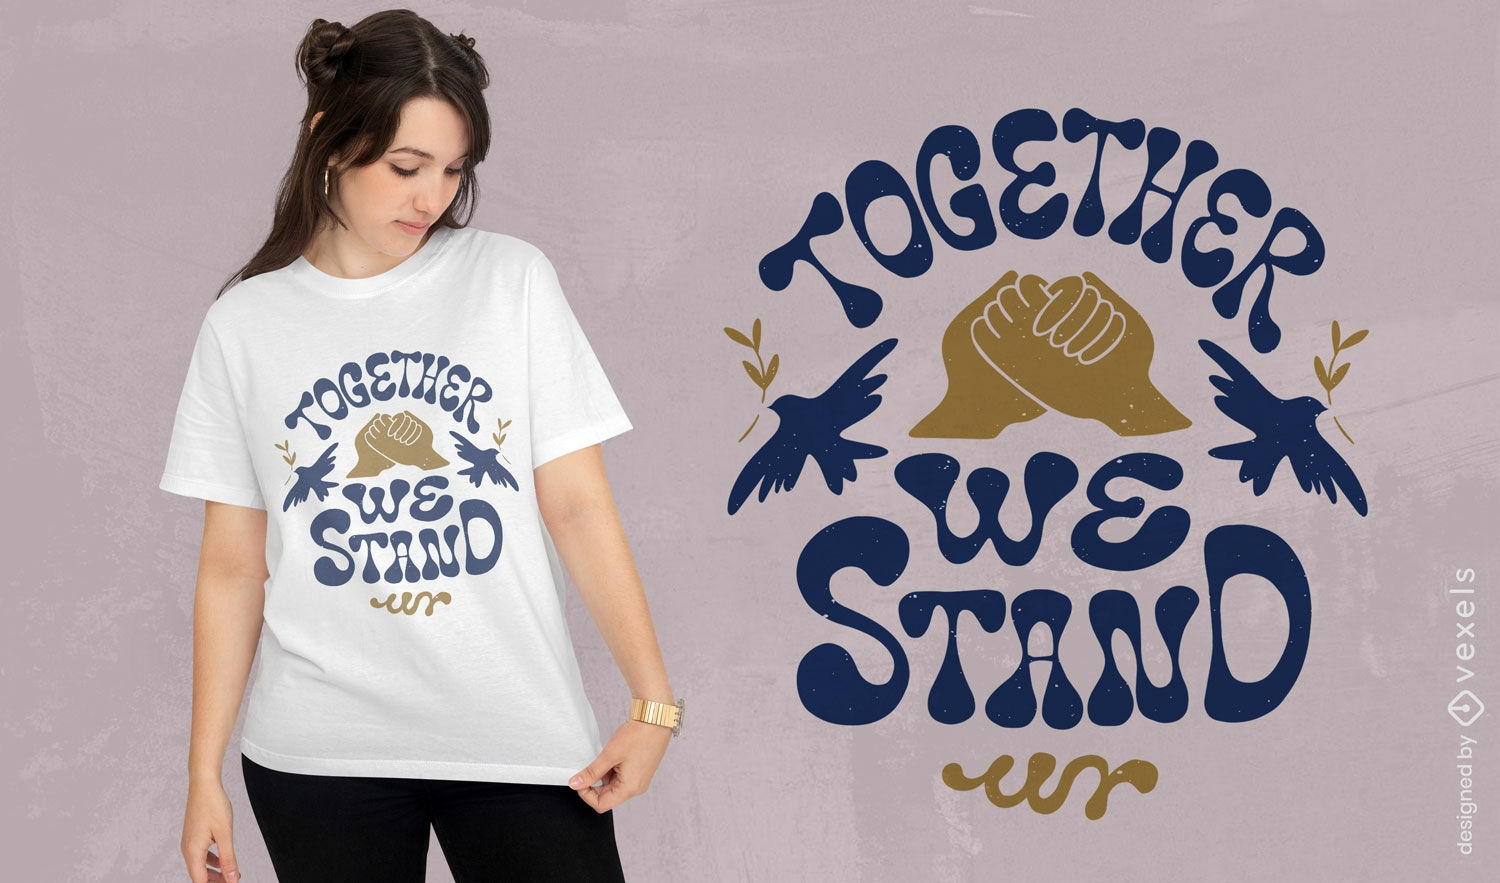 Stand together peace hands t-shirt design